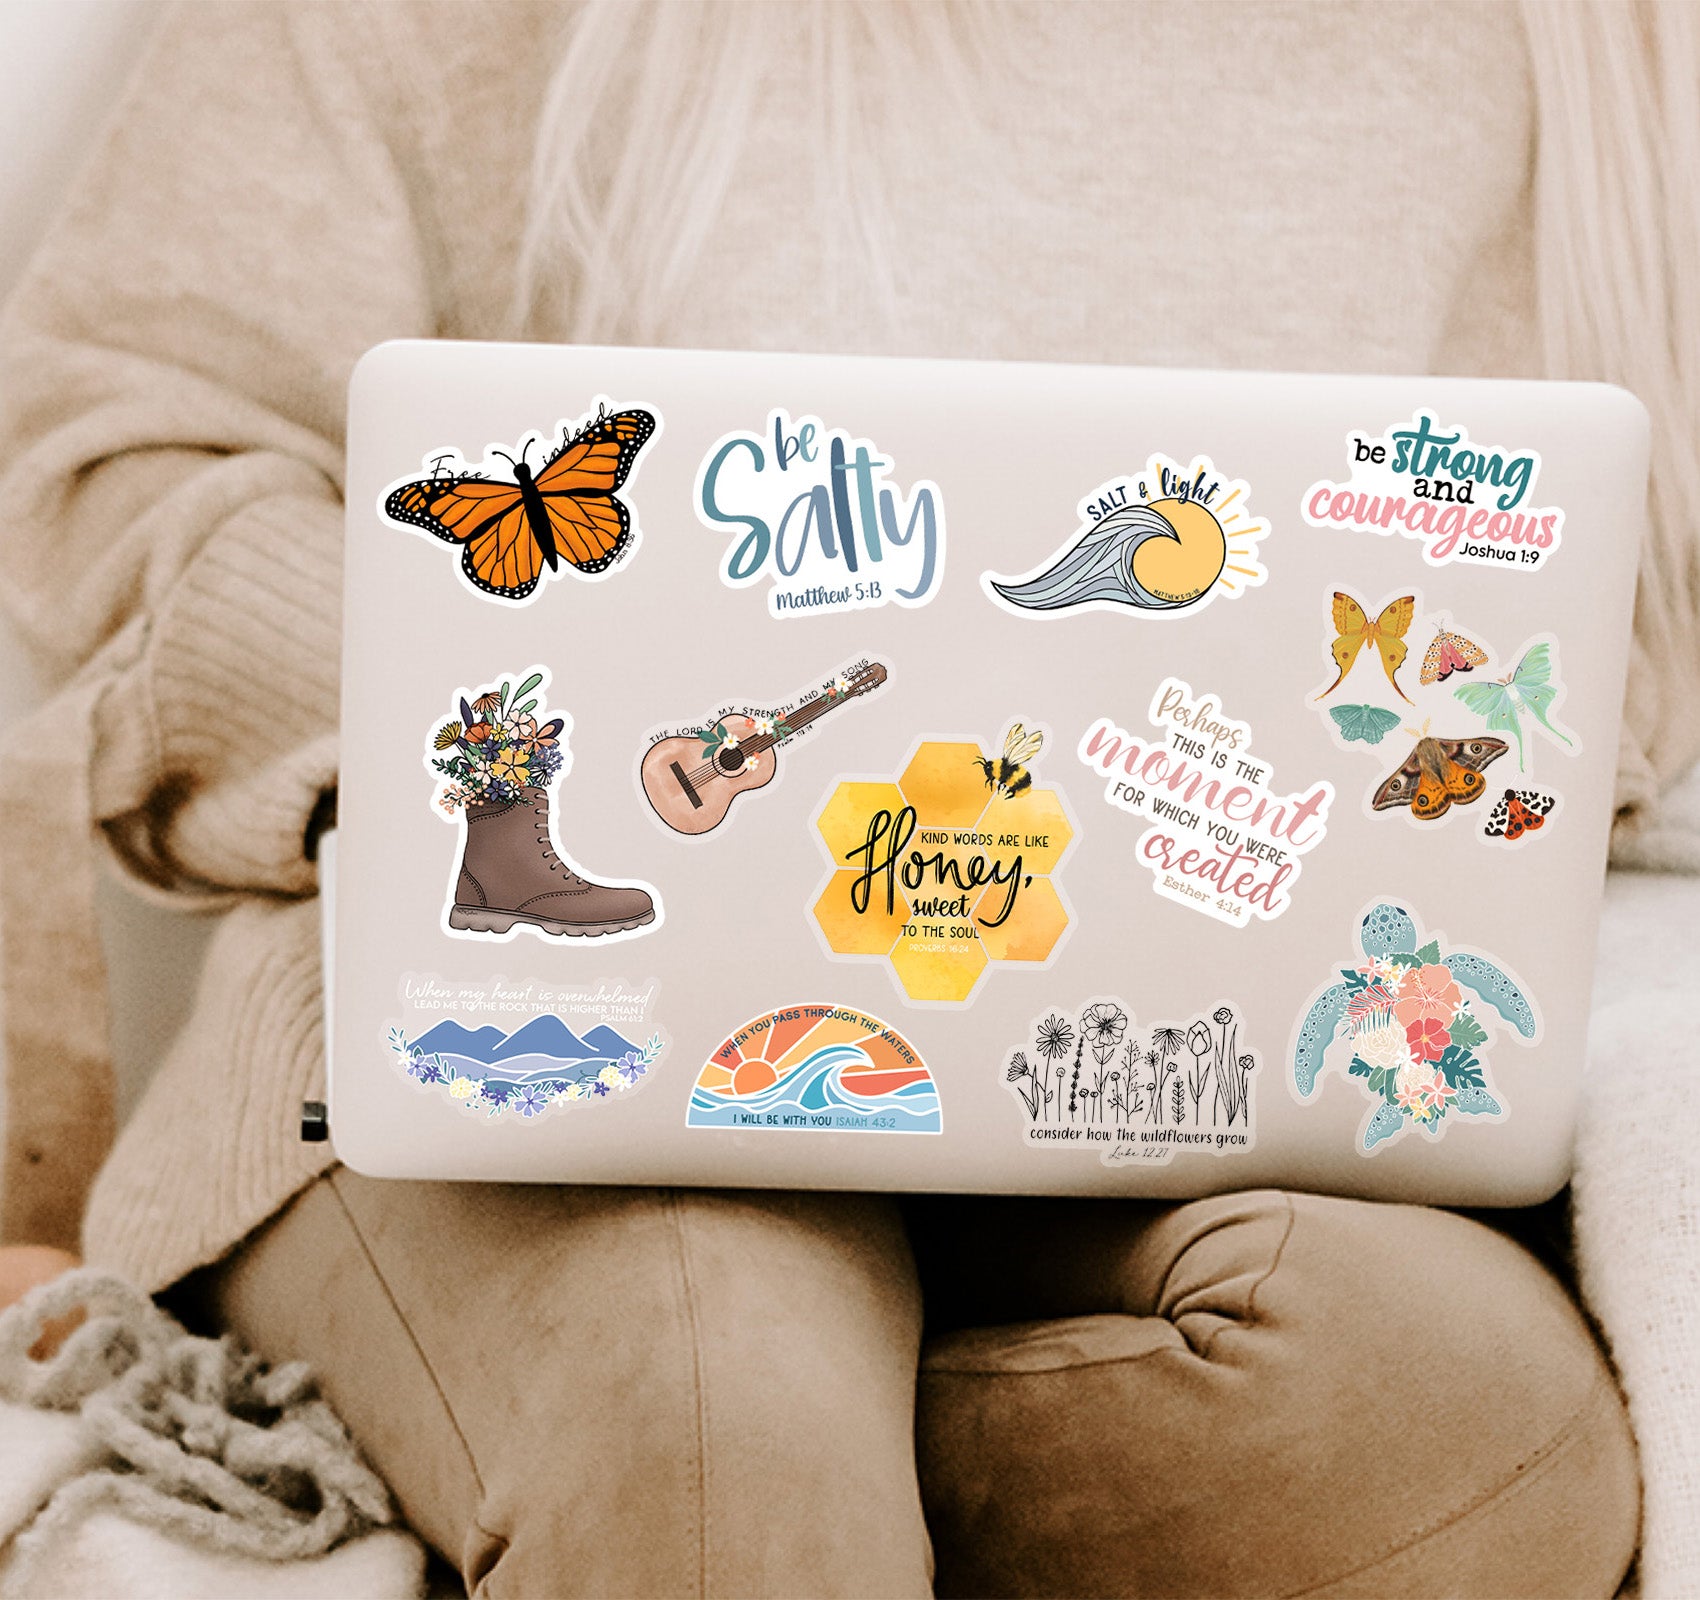 Christian laptop decals and stickers